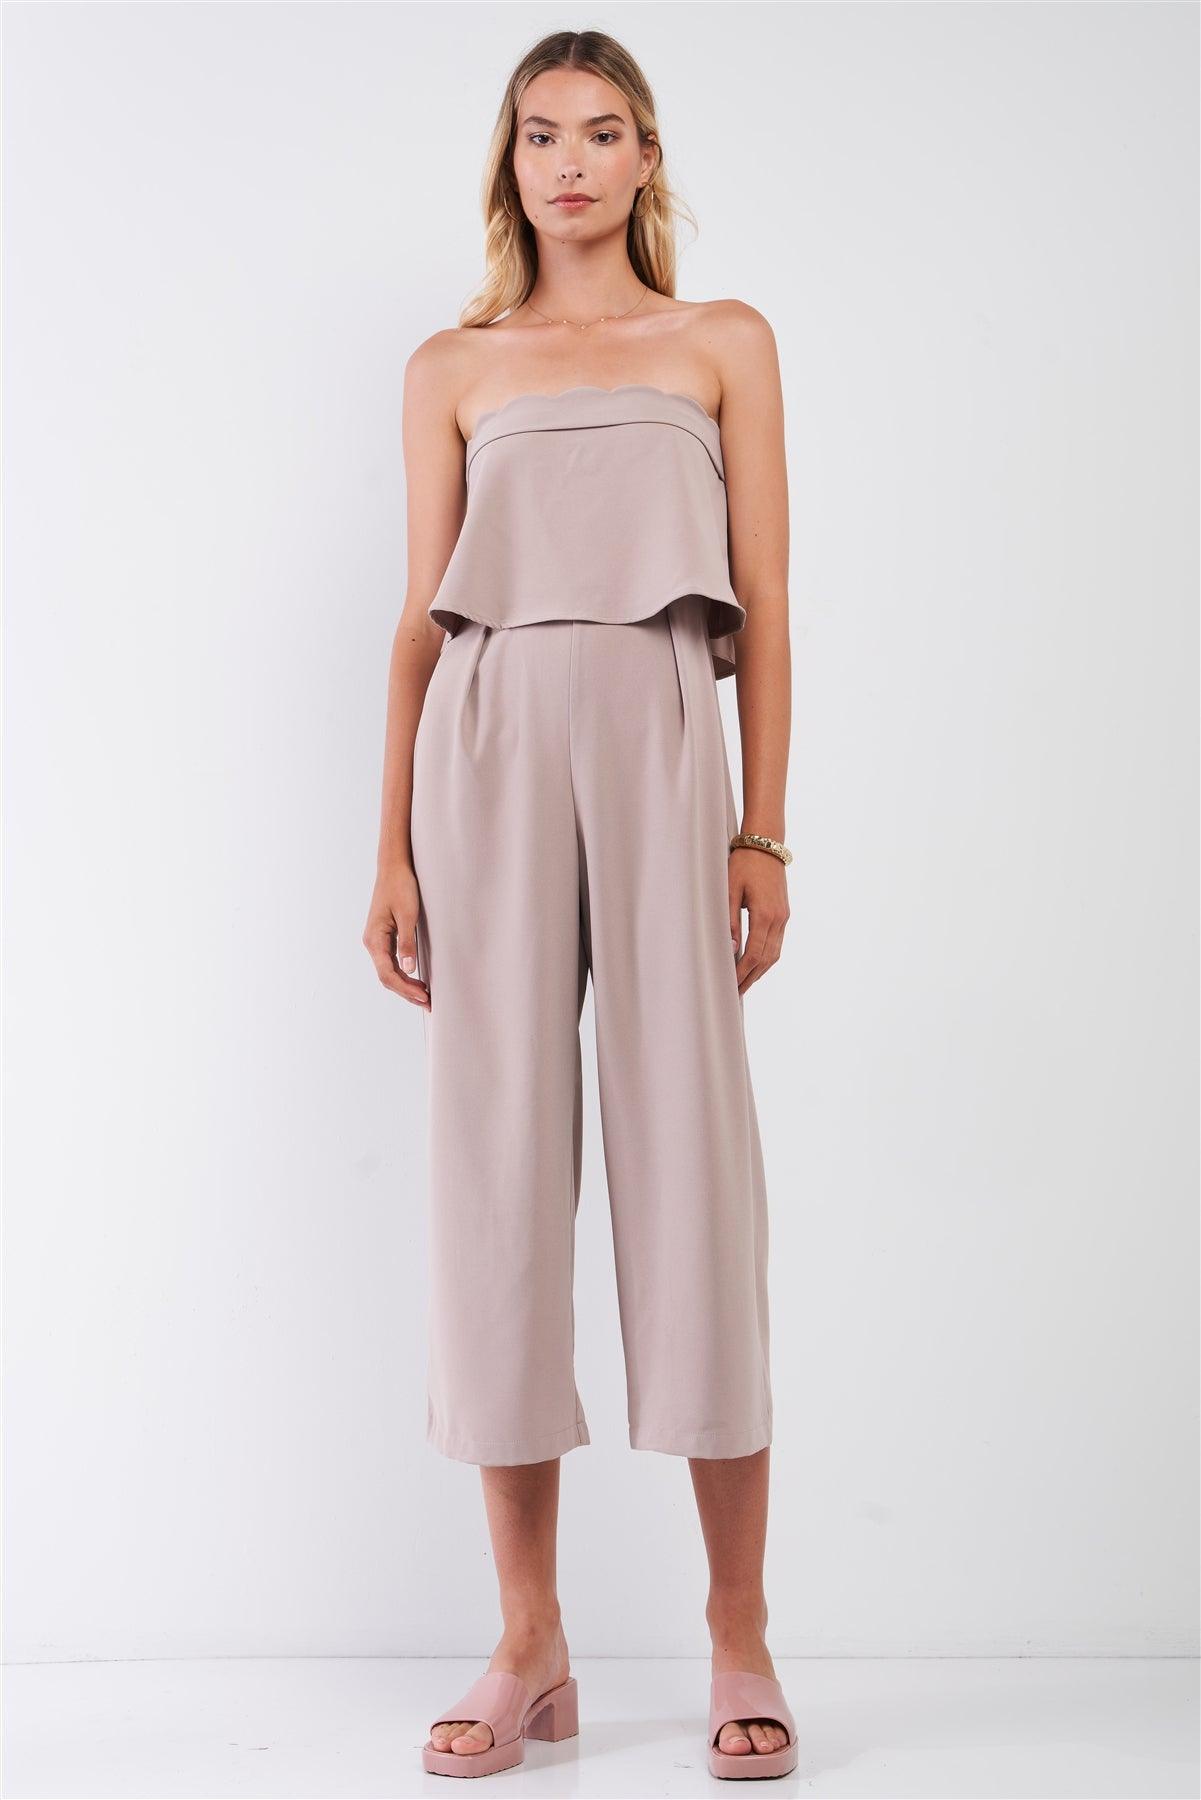 Mocha Strapless Layered Top High Waist Wide Leg Ankle Length Jumpsuit